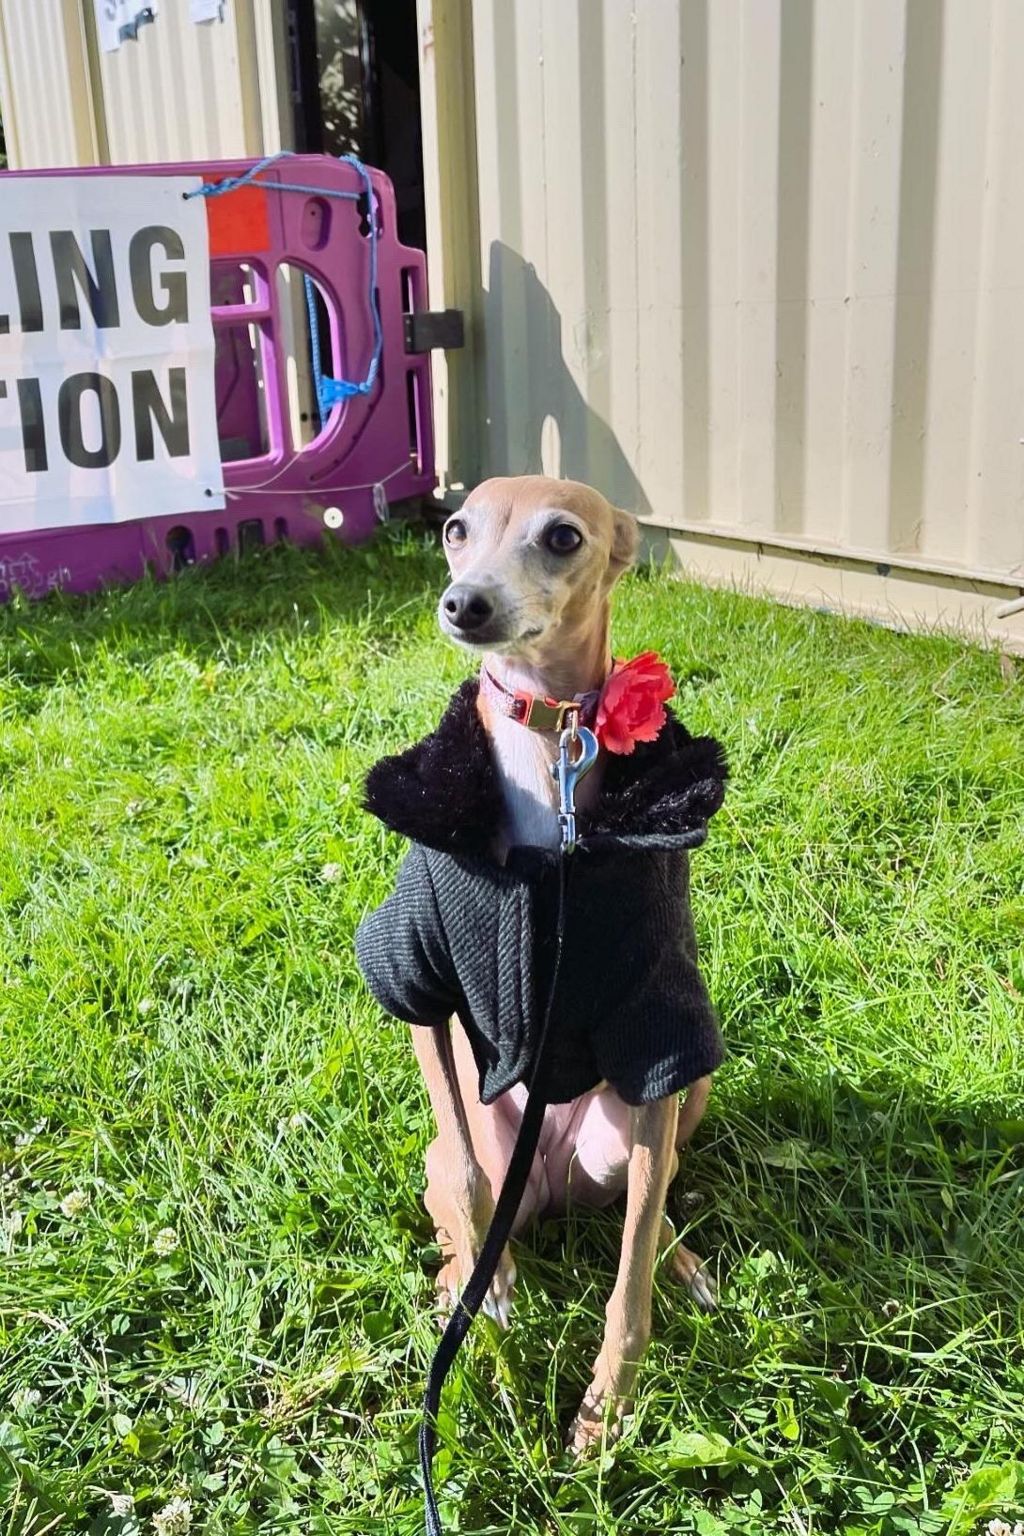 Frida, an Italian greyhound, at a Middlesbrough polling station, wearing a winter coat